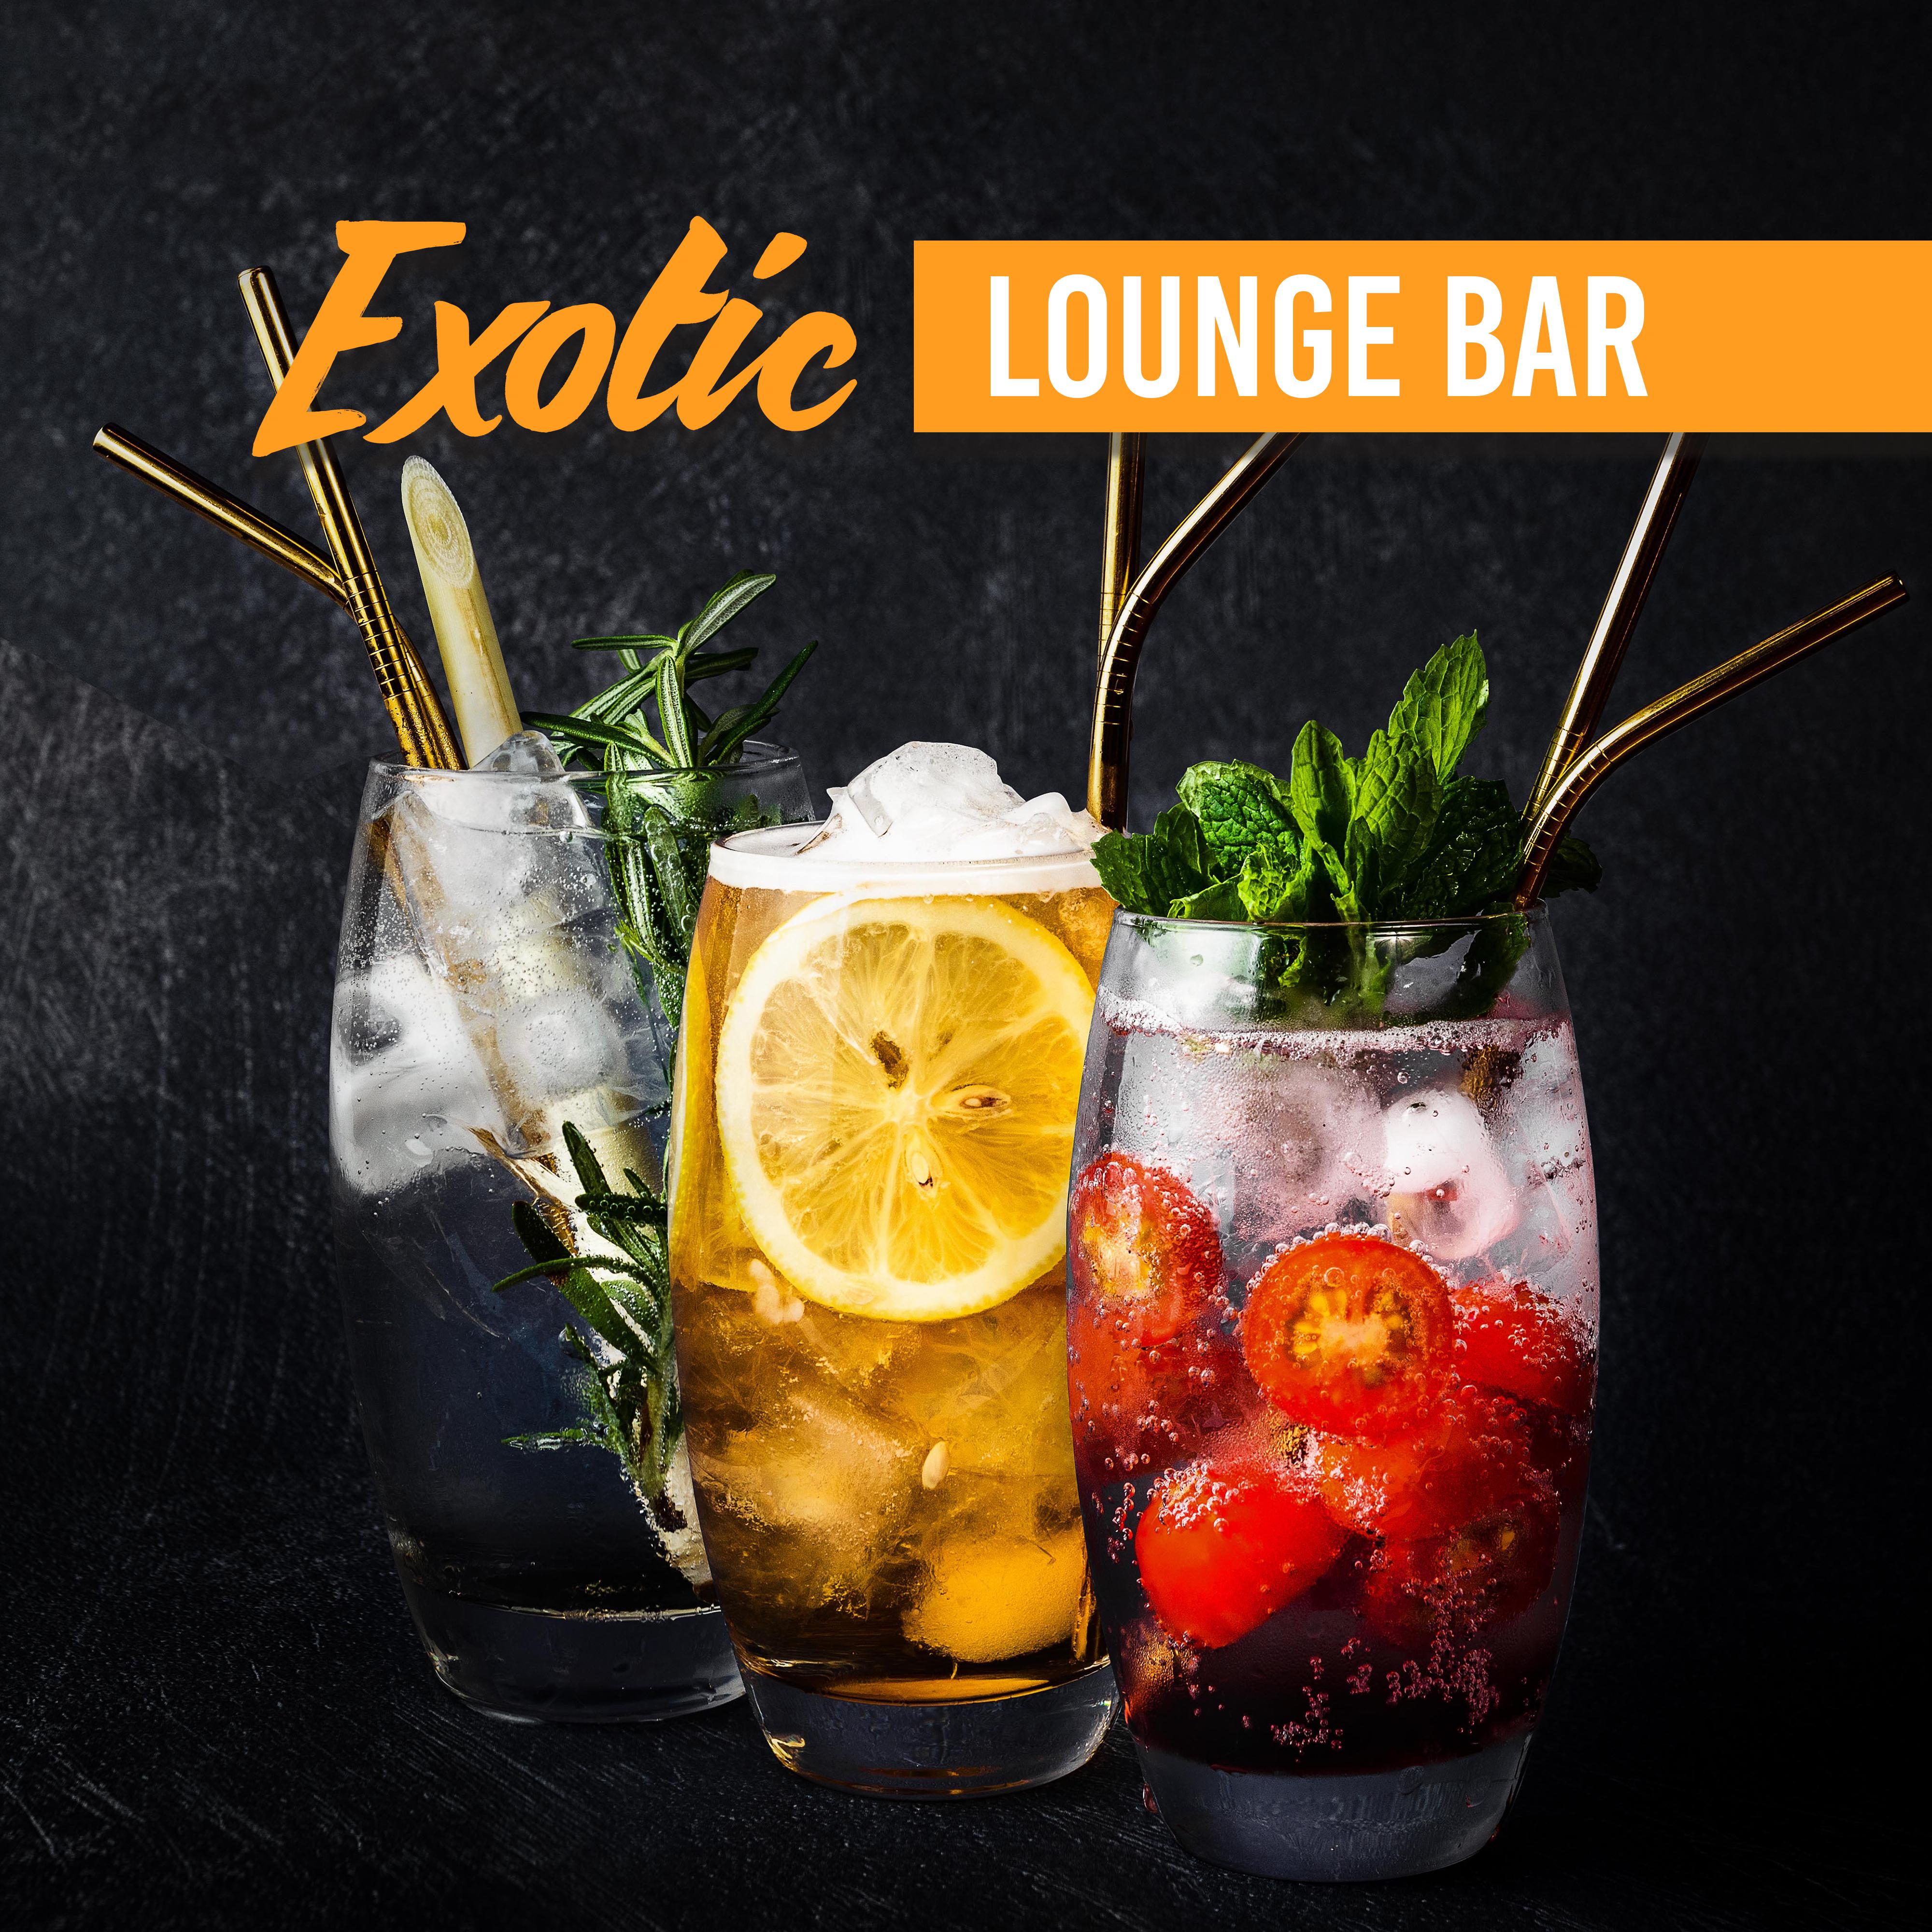 Exotic Lounge Bar: Tropical Sounds from Around the World, Chillout Holiday Music, Relax and Unwind, Bar Background Music